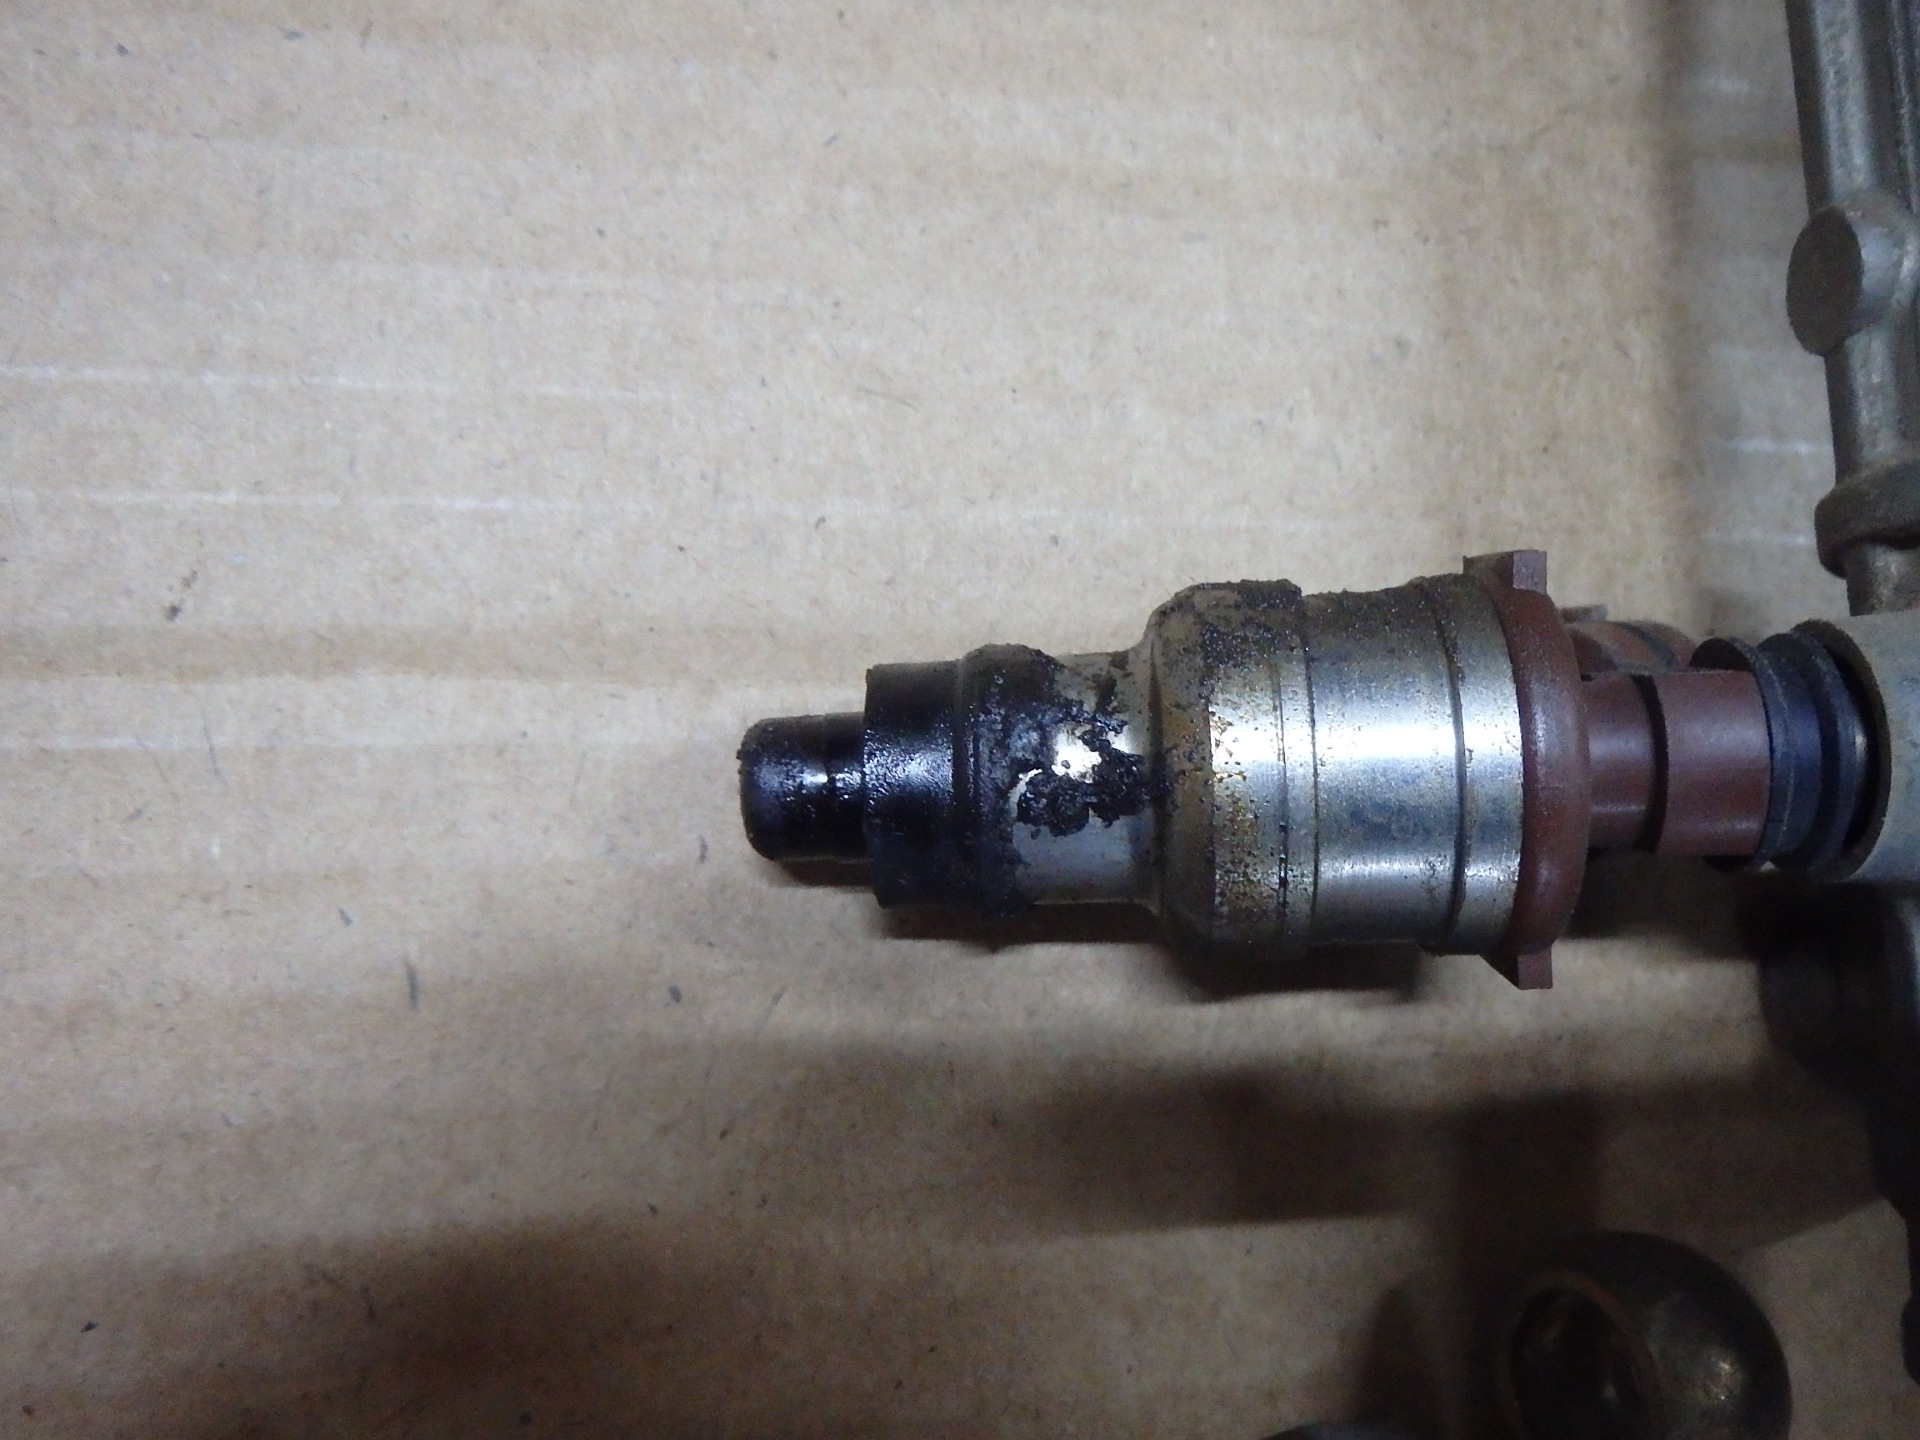 Dirty fuel injector